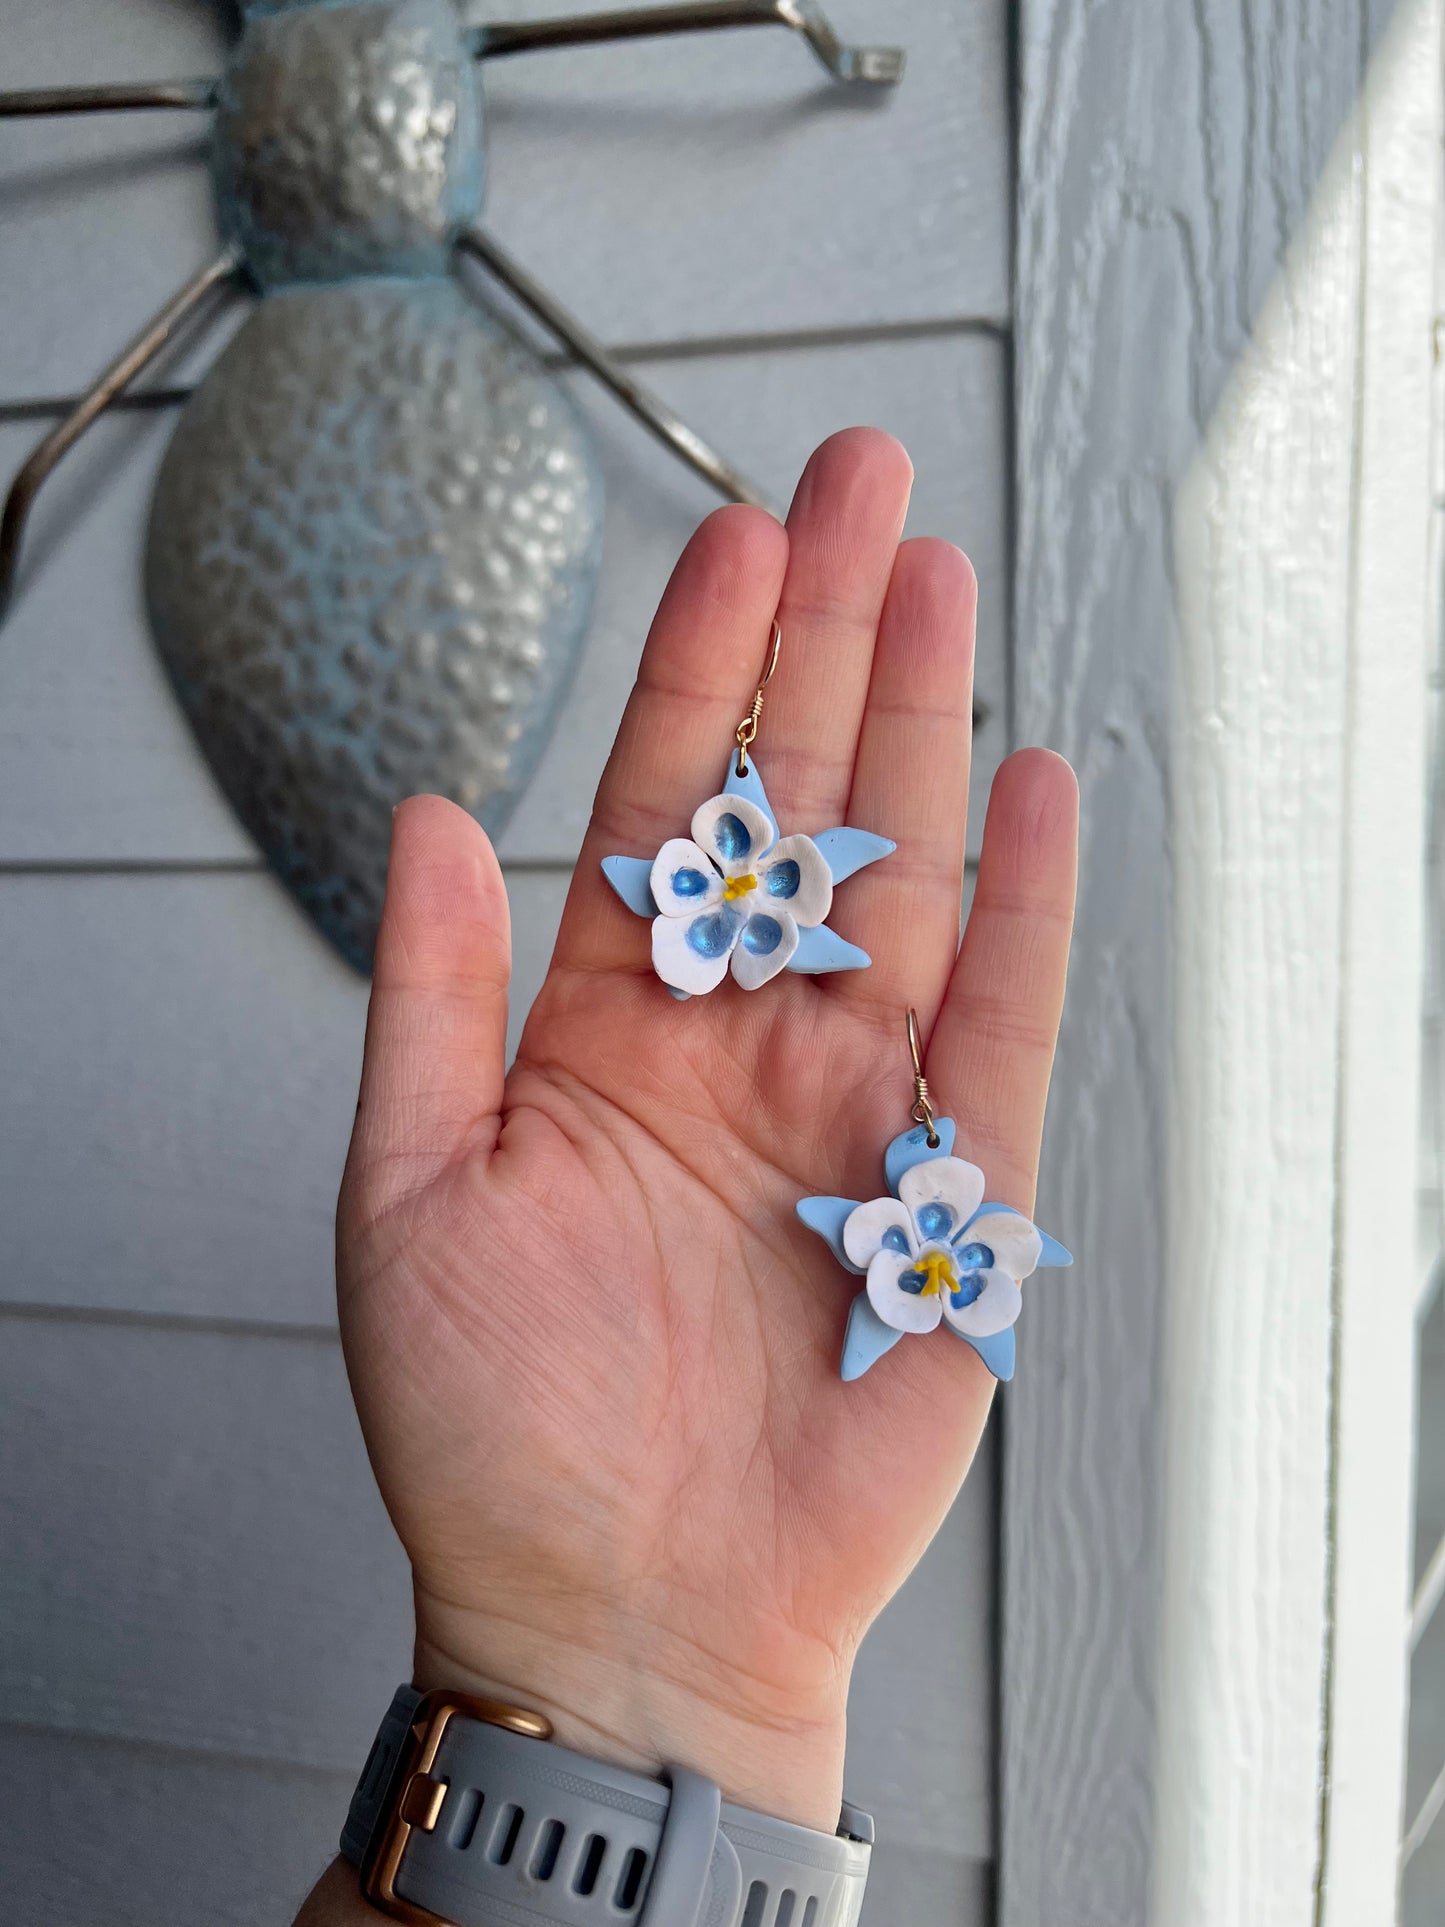 Channel the spirit of the Rockies with our columbine earrings, paying homage to Colorado's stunning flora. These earrings evoke a sense of wilderness and natural beauty, perfect for outdoor enthusiasts.